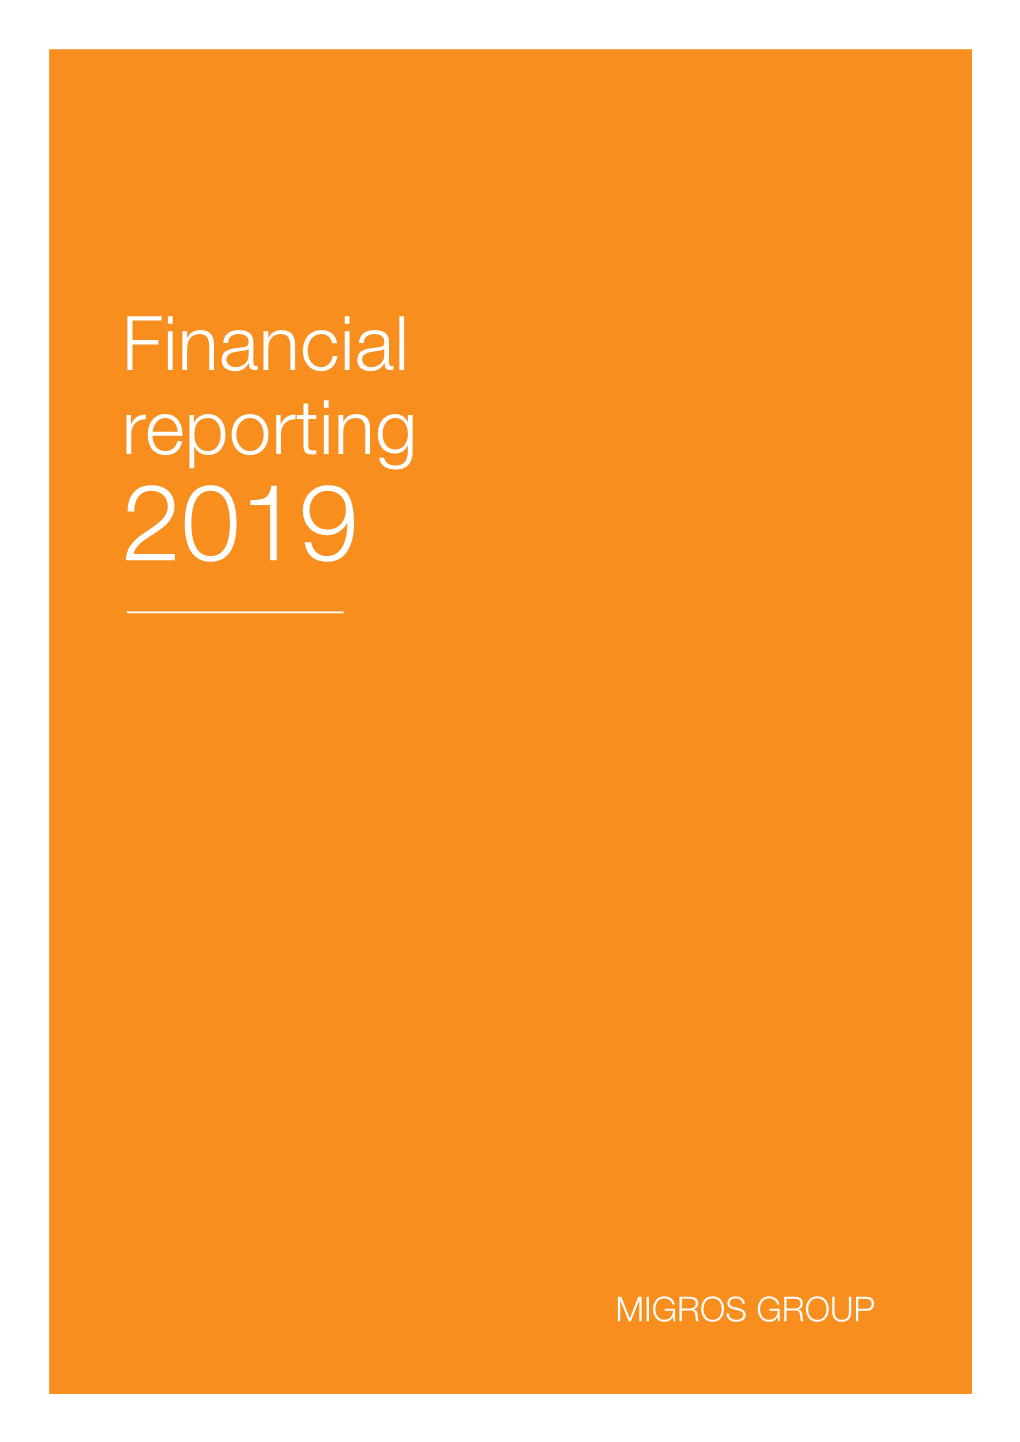 PDF Migros Group Financial Report